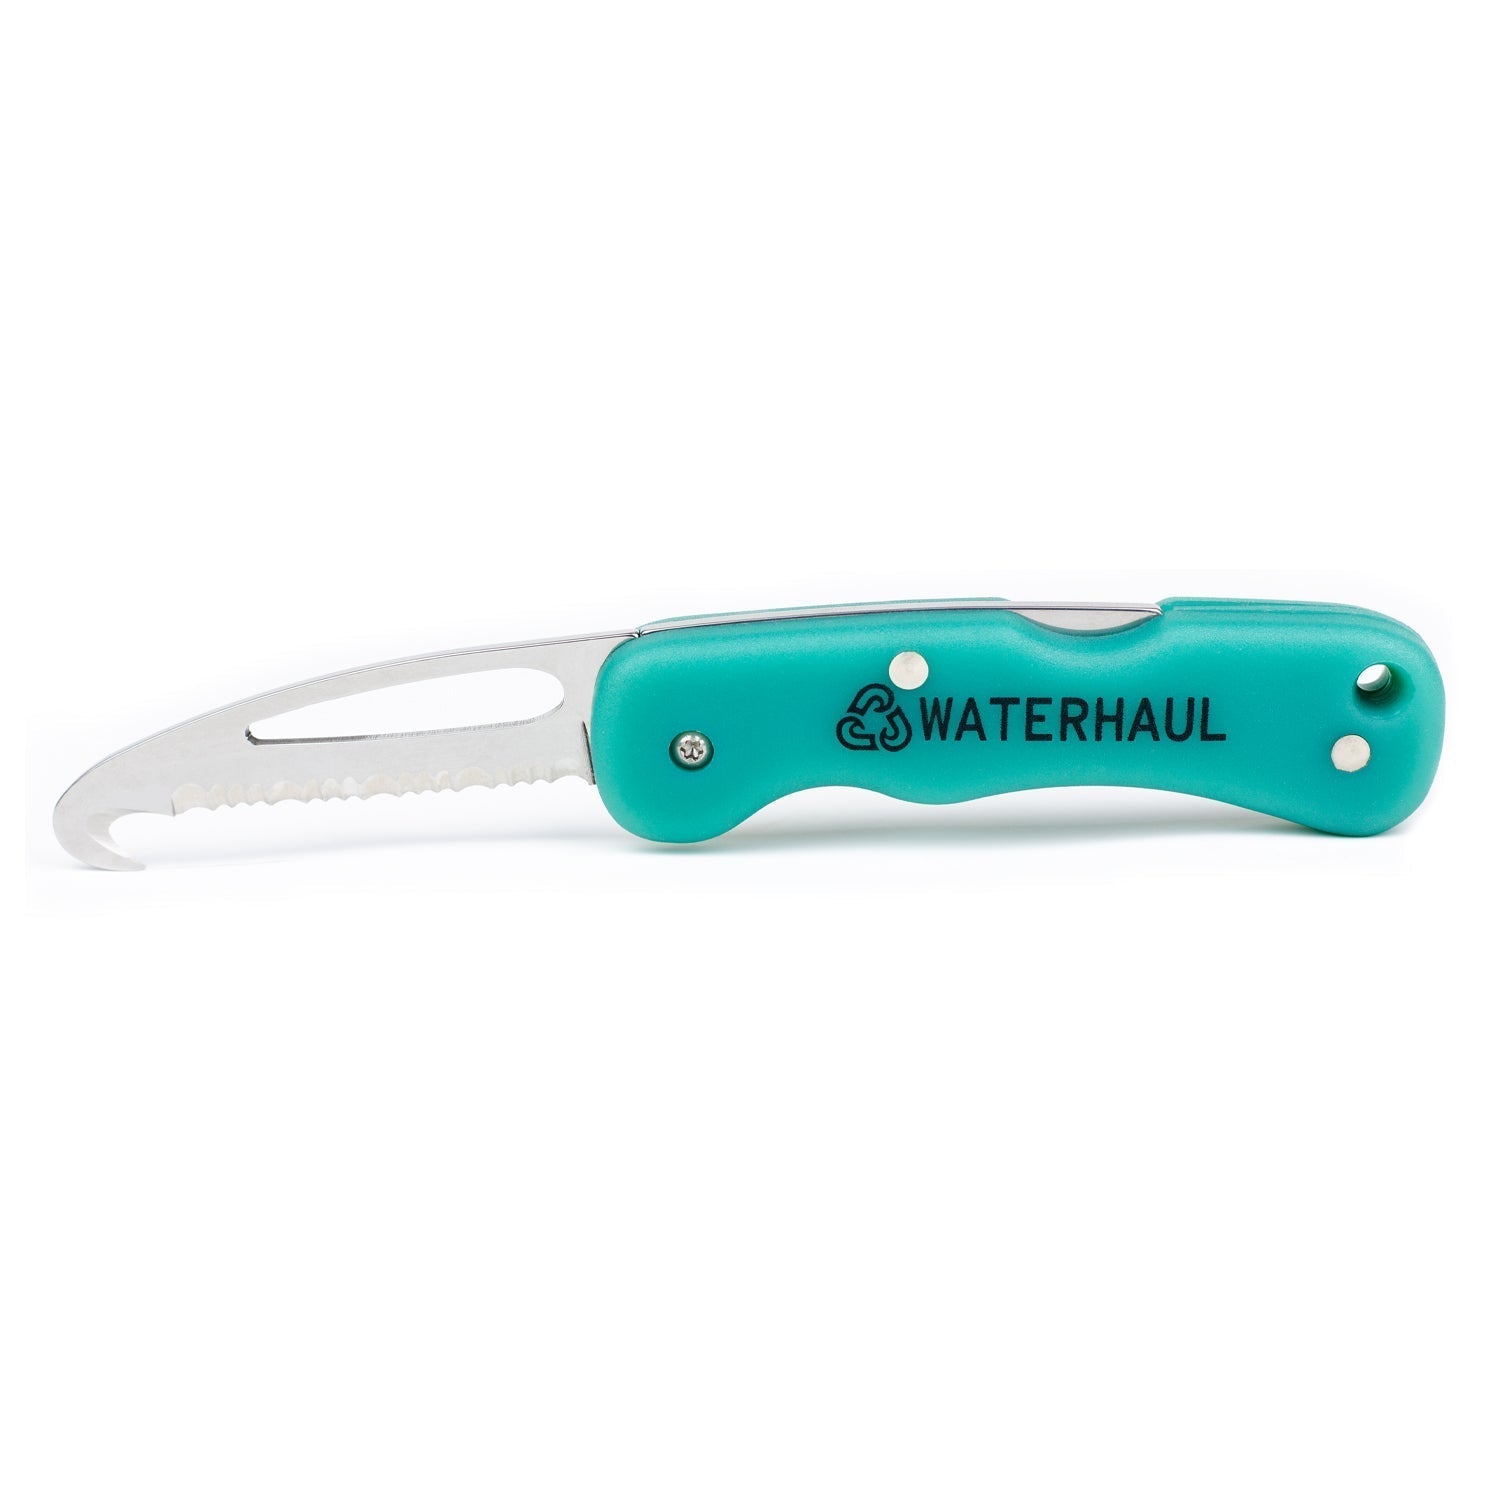 BYCATCH - Recycled Beach Cleaner's Knife - Waterhaul